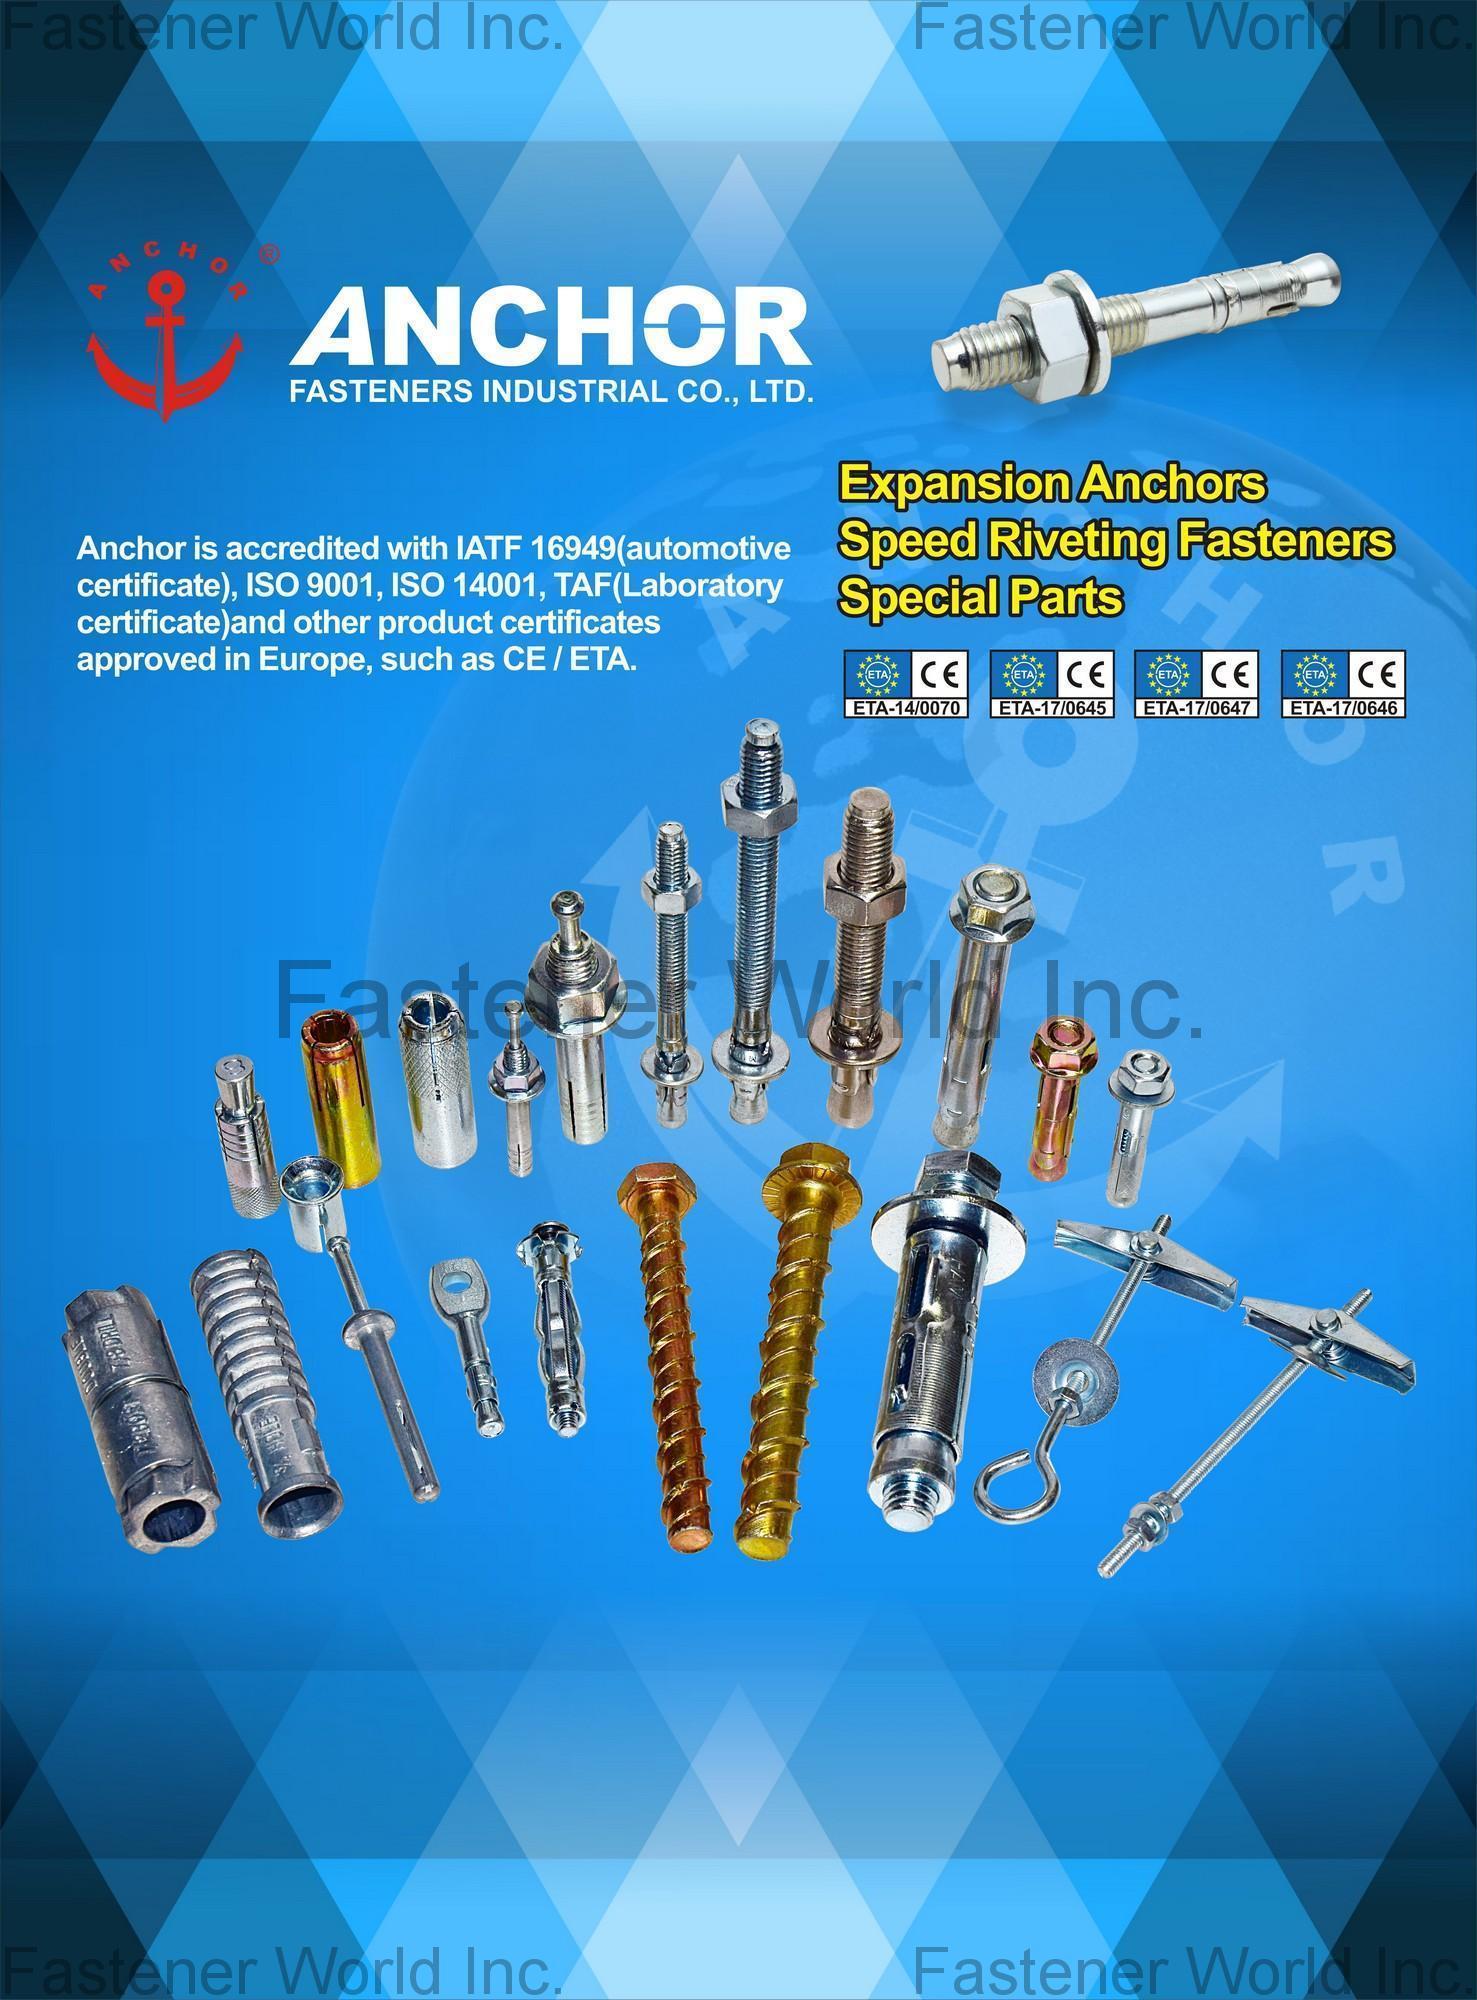 ANCHOR FASTENERS INDUSTRIAL CO., LTD.  , Expansion Anchors, Speed Riveting Fasteners, Special Parts , Expansion Anchors